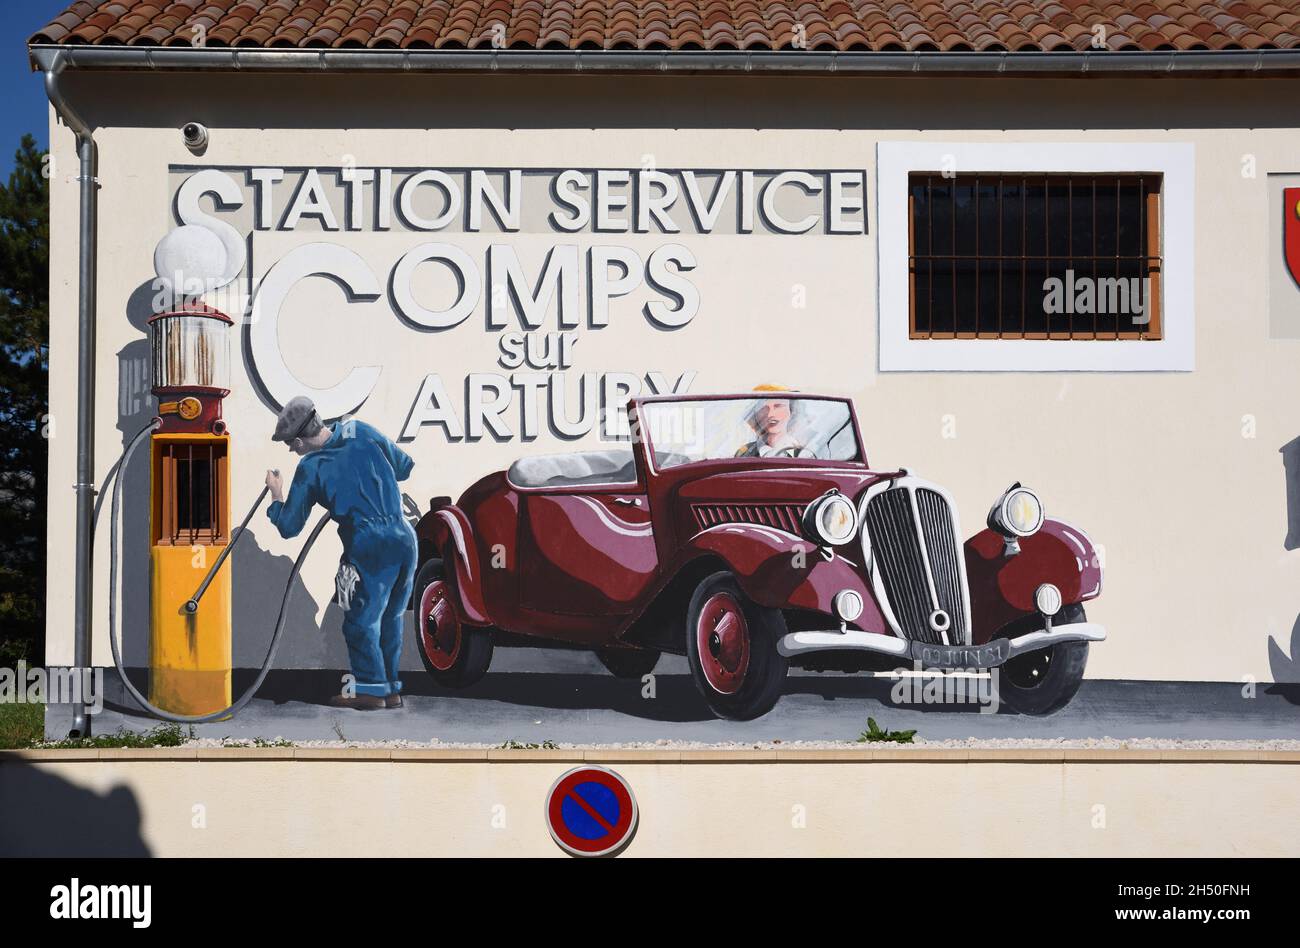 Petrol Station, Filling Station or Gas Station with Decorative Murals or Wall Painting of Vintage French Car Comps-sur-Artuby Var Provence France Stock Photo